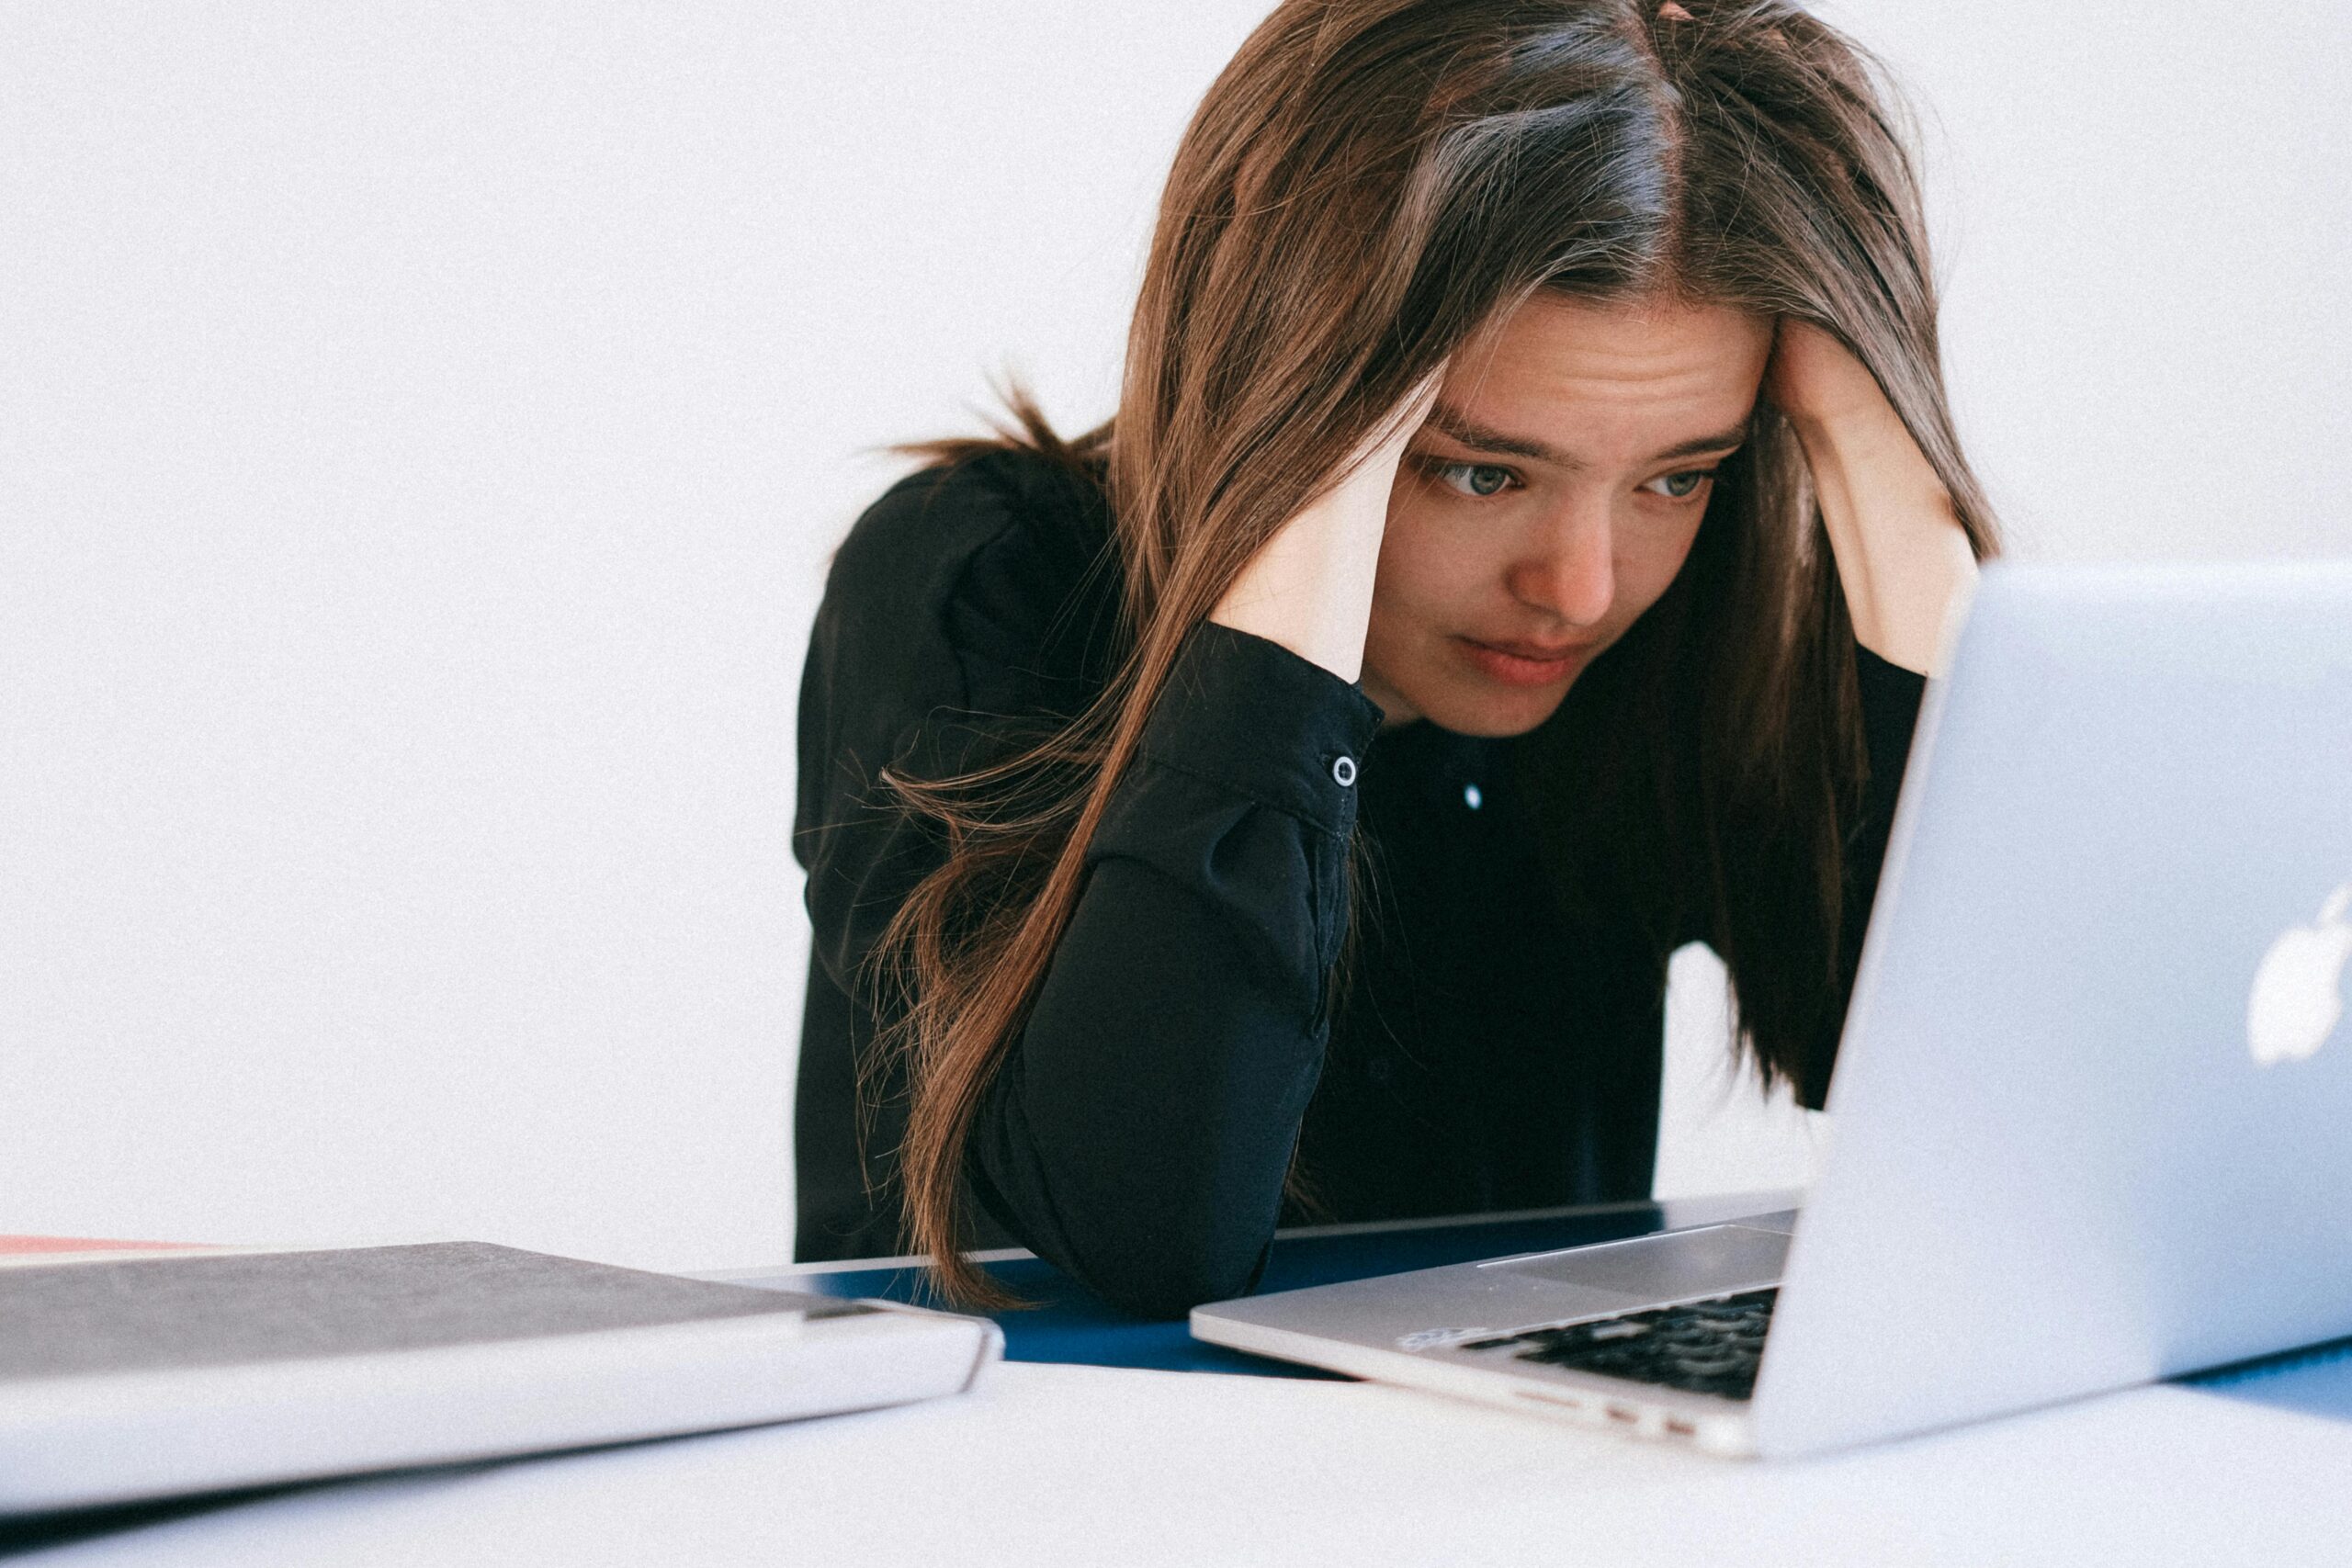 The image shows a young woman sitting at a desk, looking stressed or frustrated as she stares at her laptop screen